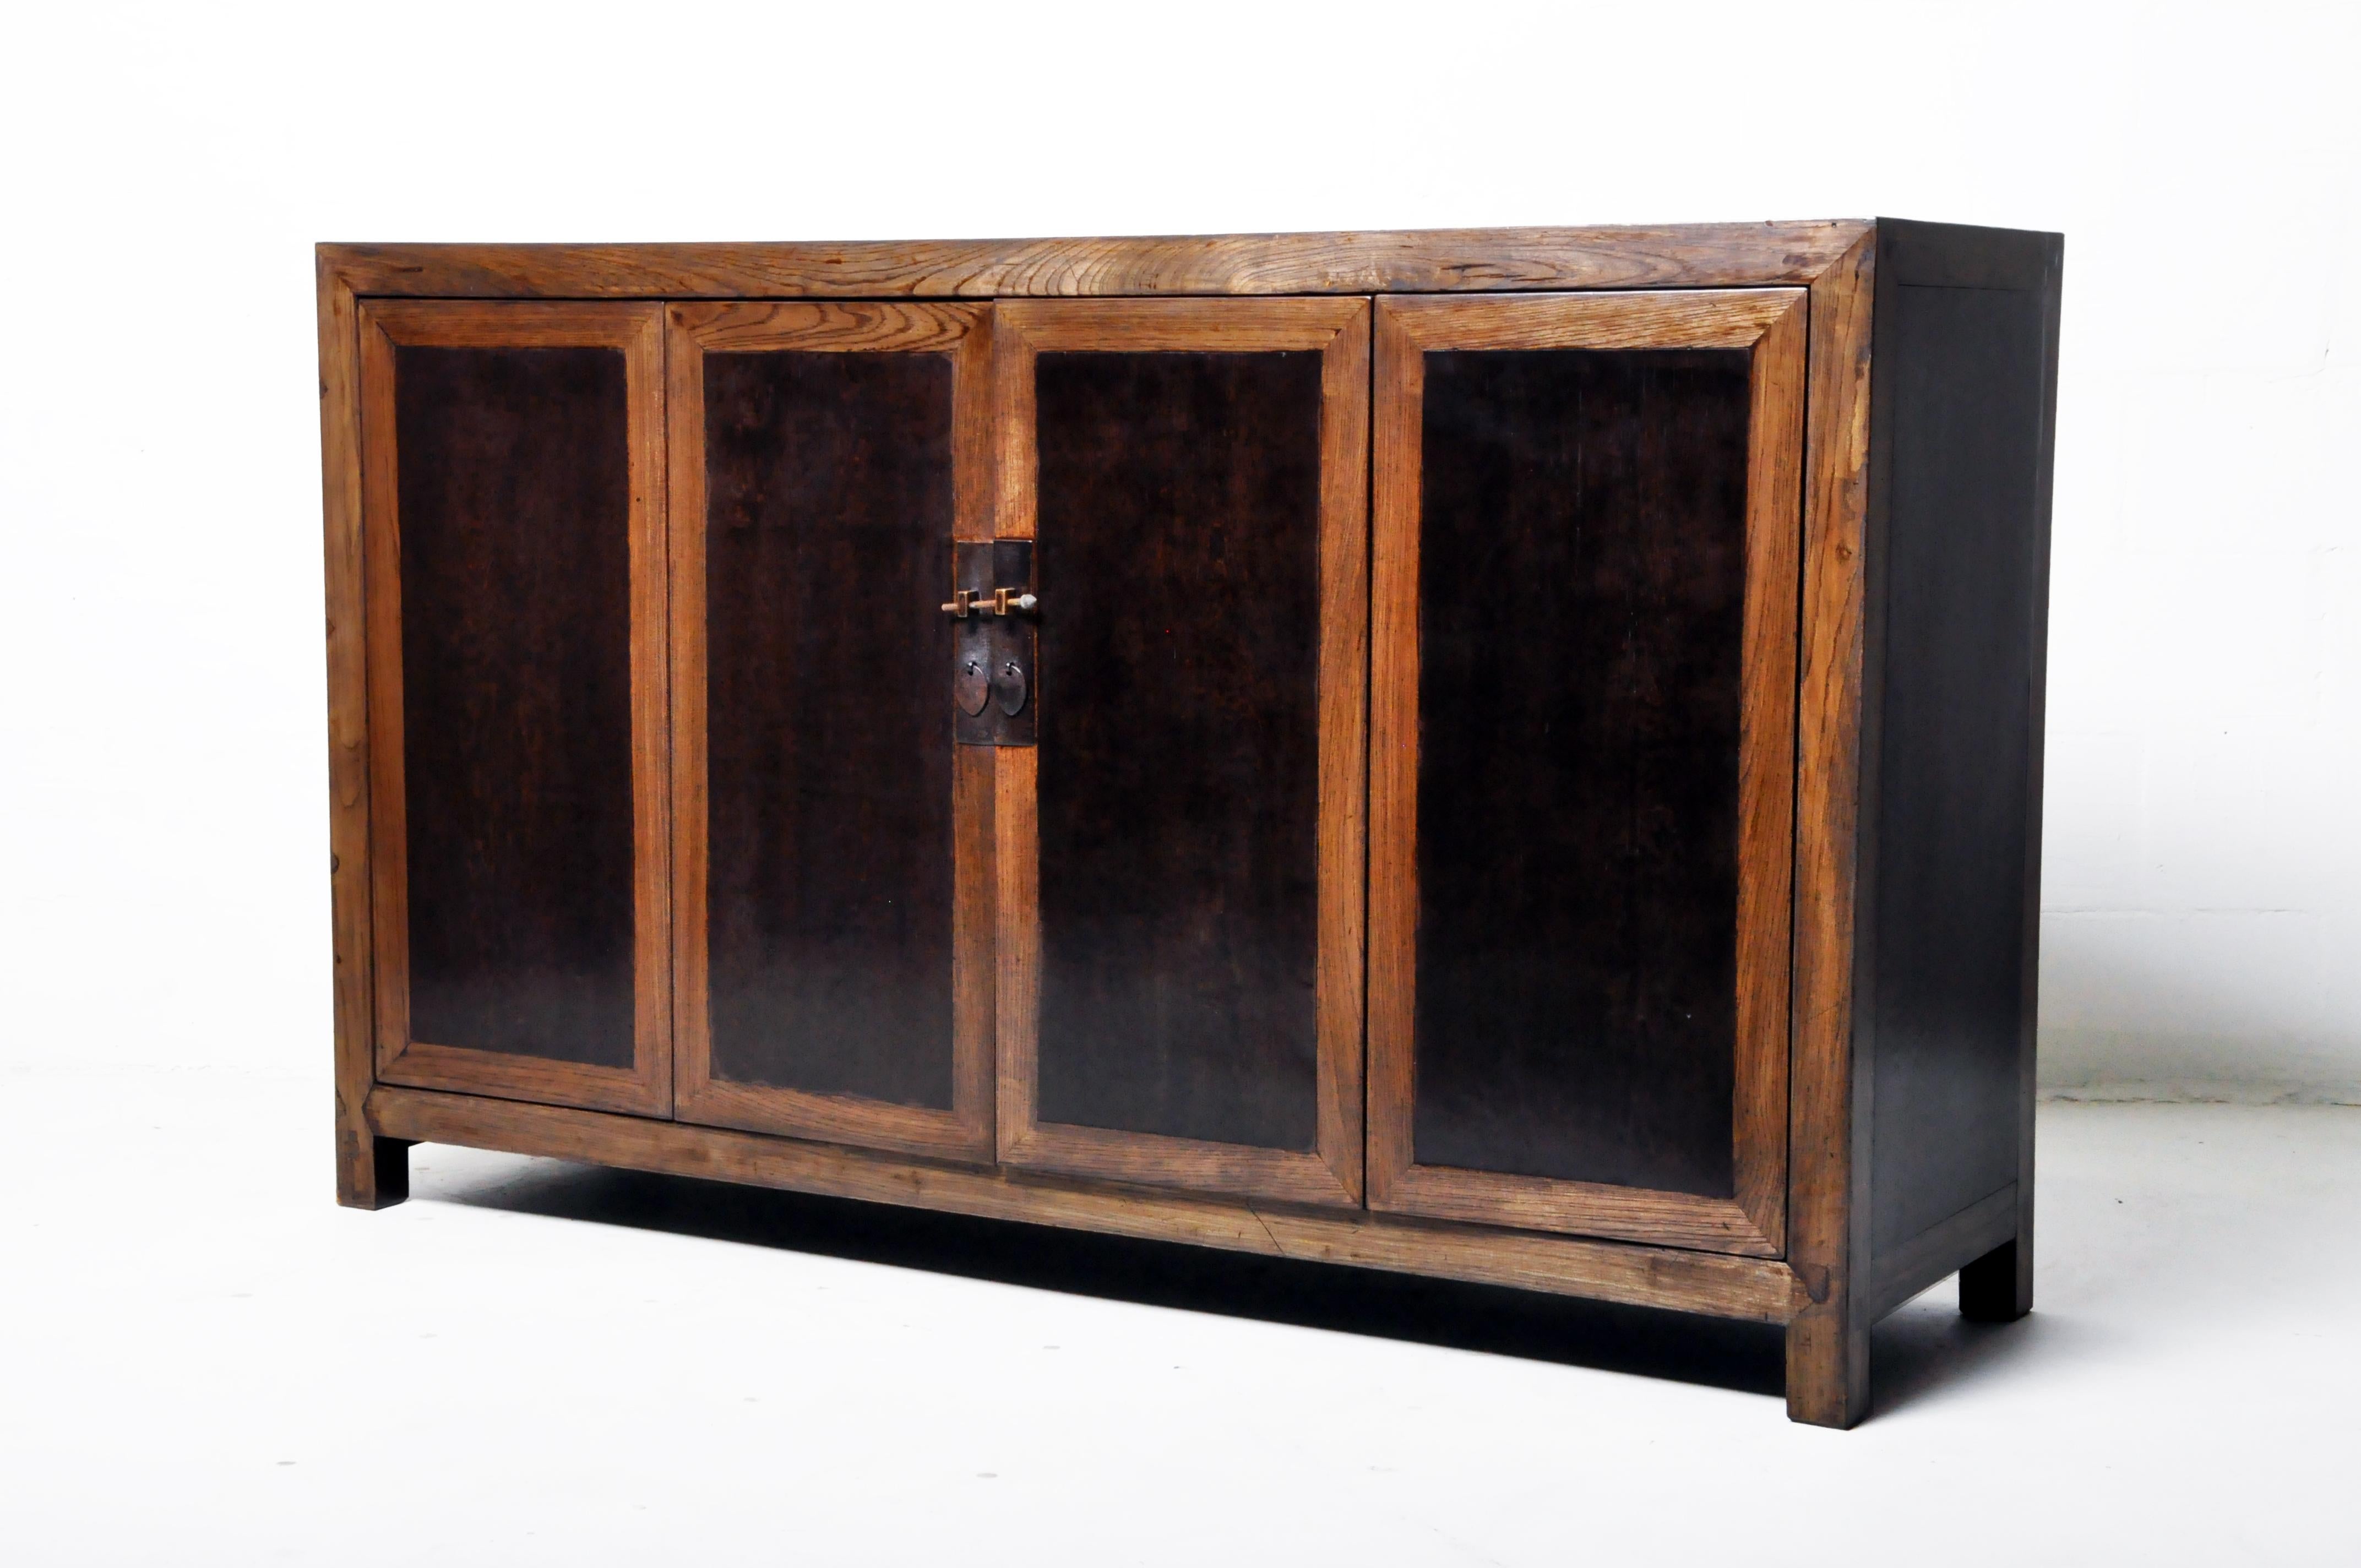 This Chinese sideboard was made from elmwood and pinewood with traditional nail-less joinery. The piece features a pair of bi-fold doors and a shelf for storage. Wear consistent with age and use.
 